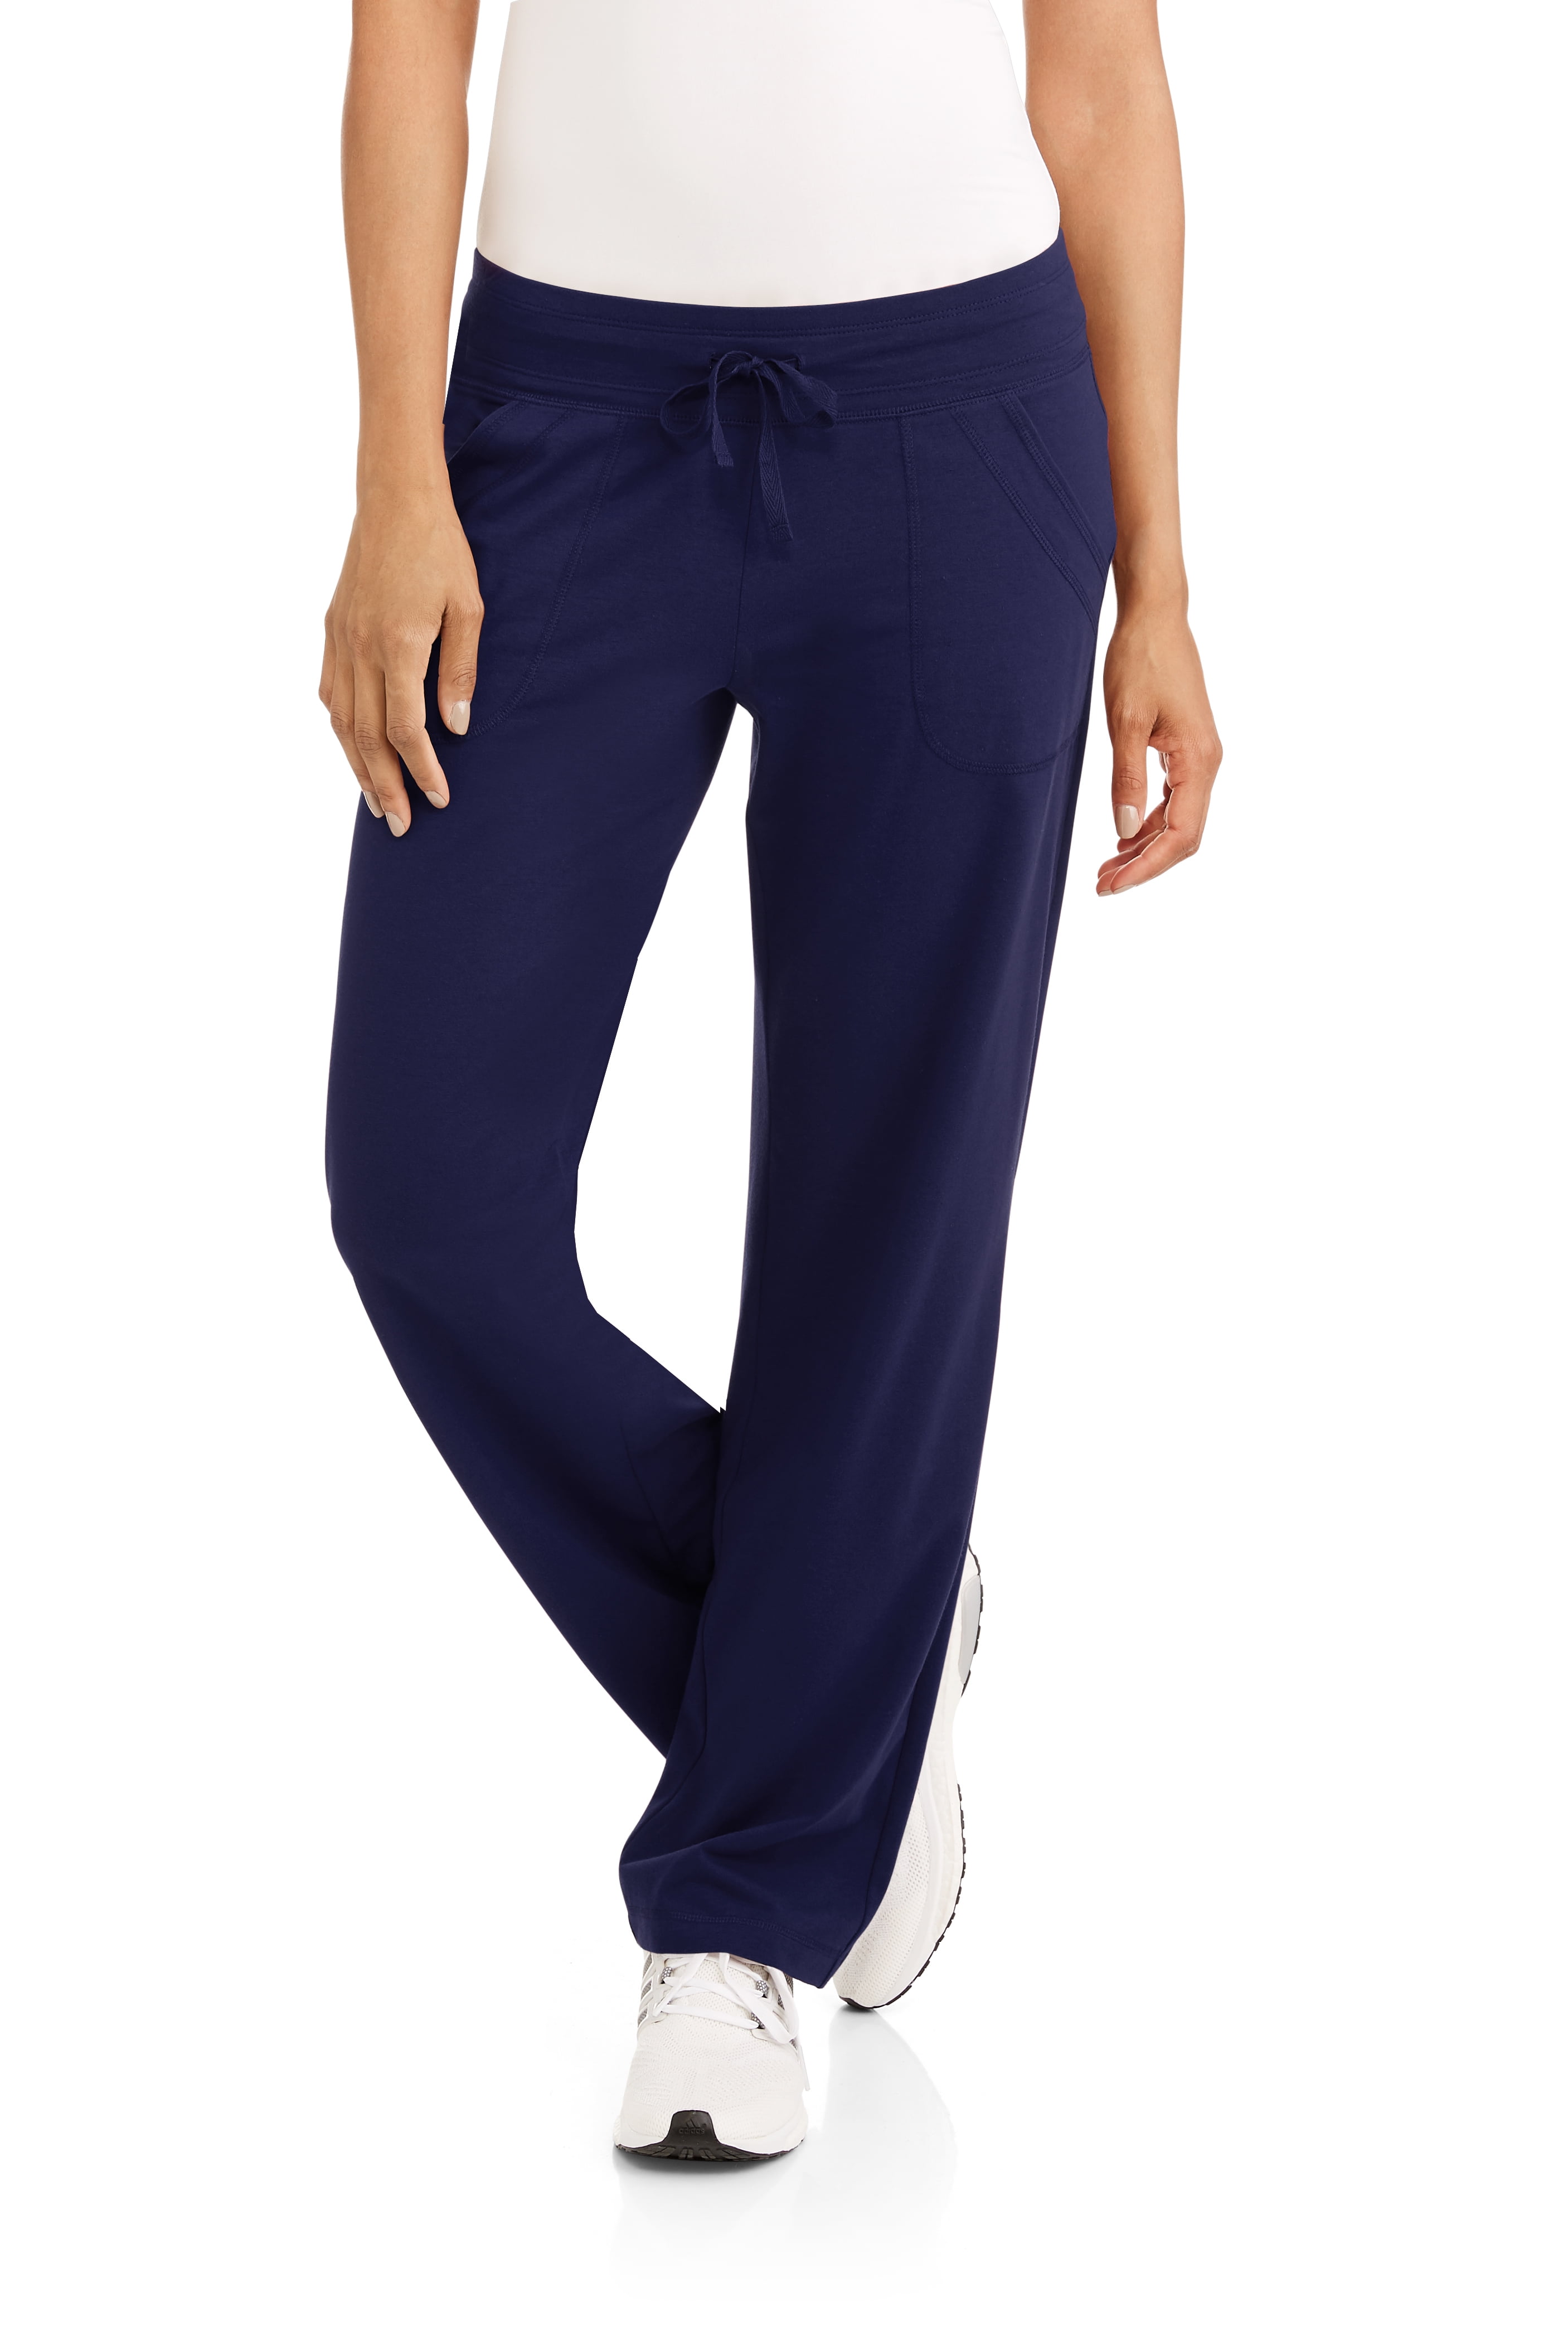 Athletic Works Women's Athleisure Knit Pant Available In Regular 